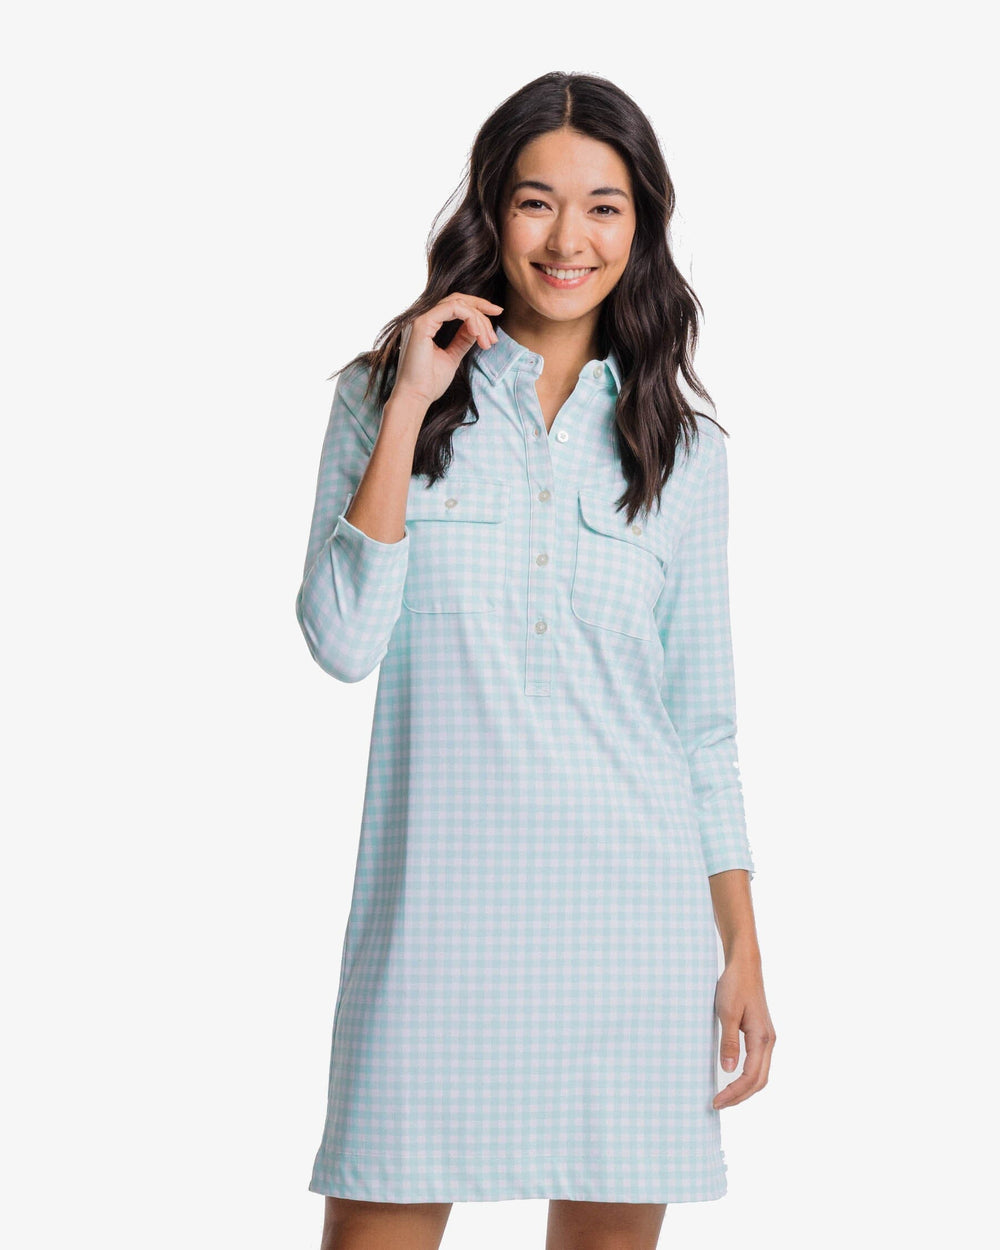 The front view of the Southern Tide Jessica Gingham Performance Dress by Southern Tide - Baltic Teal